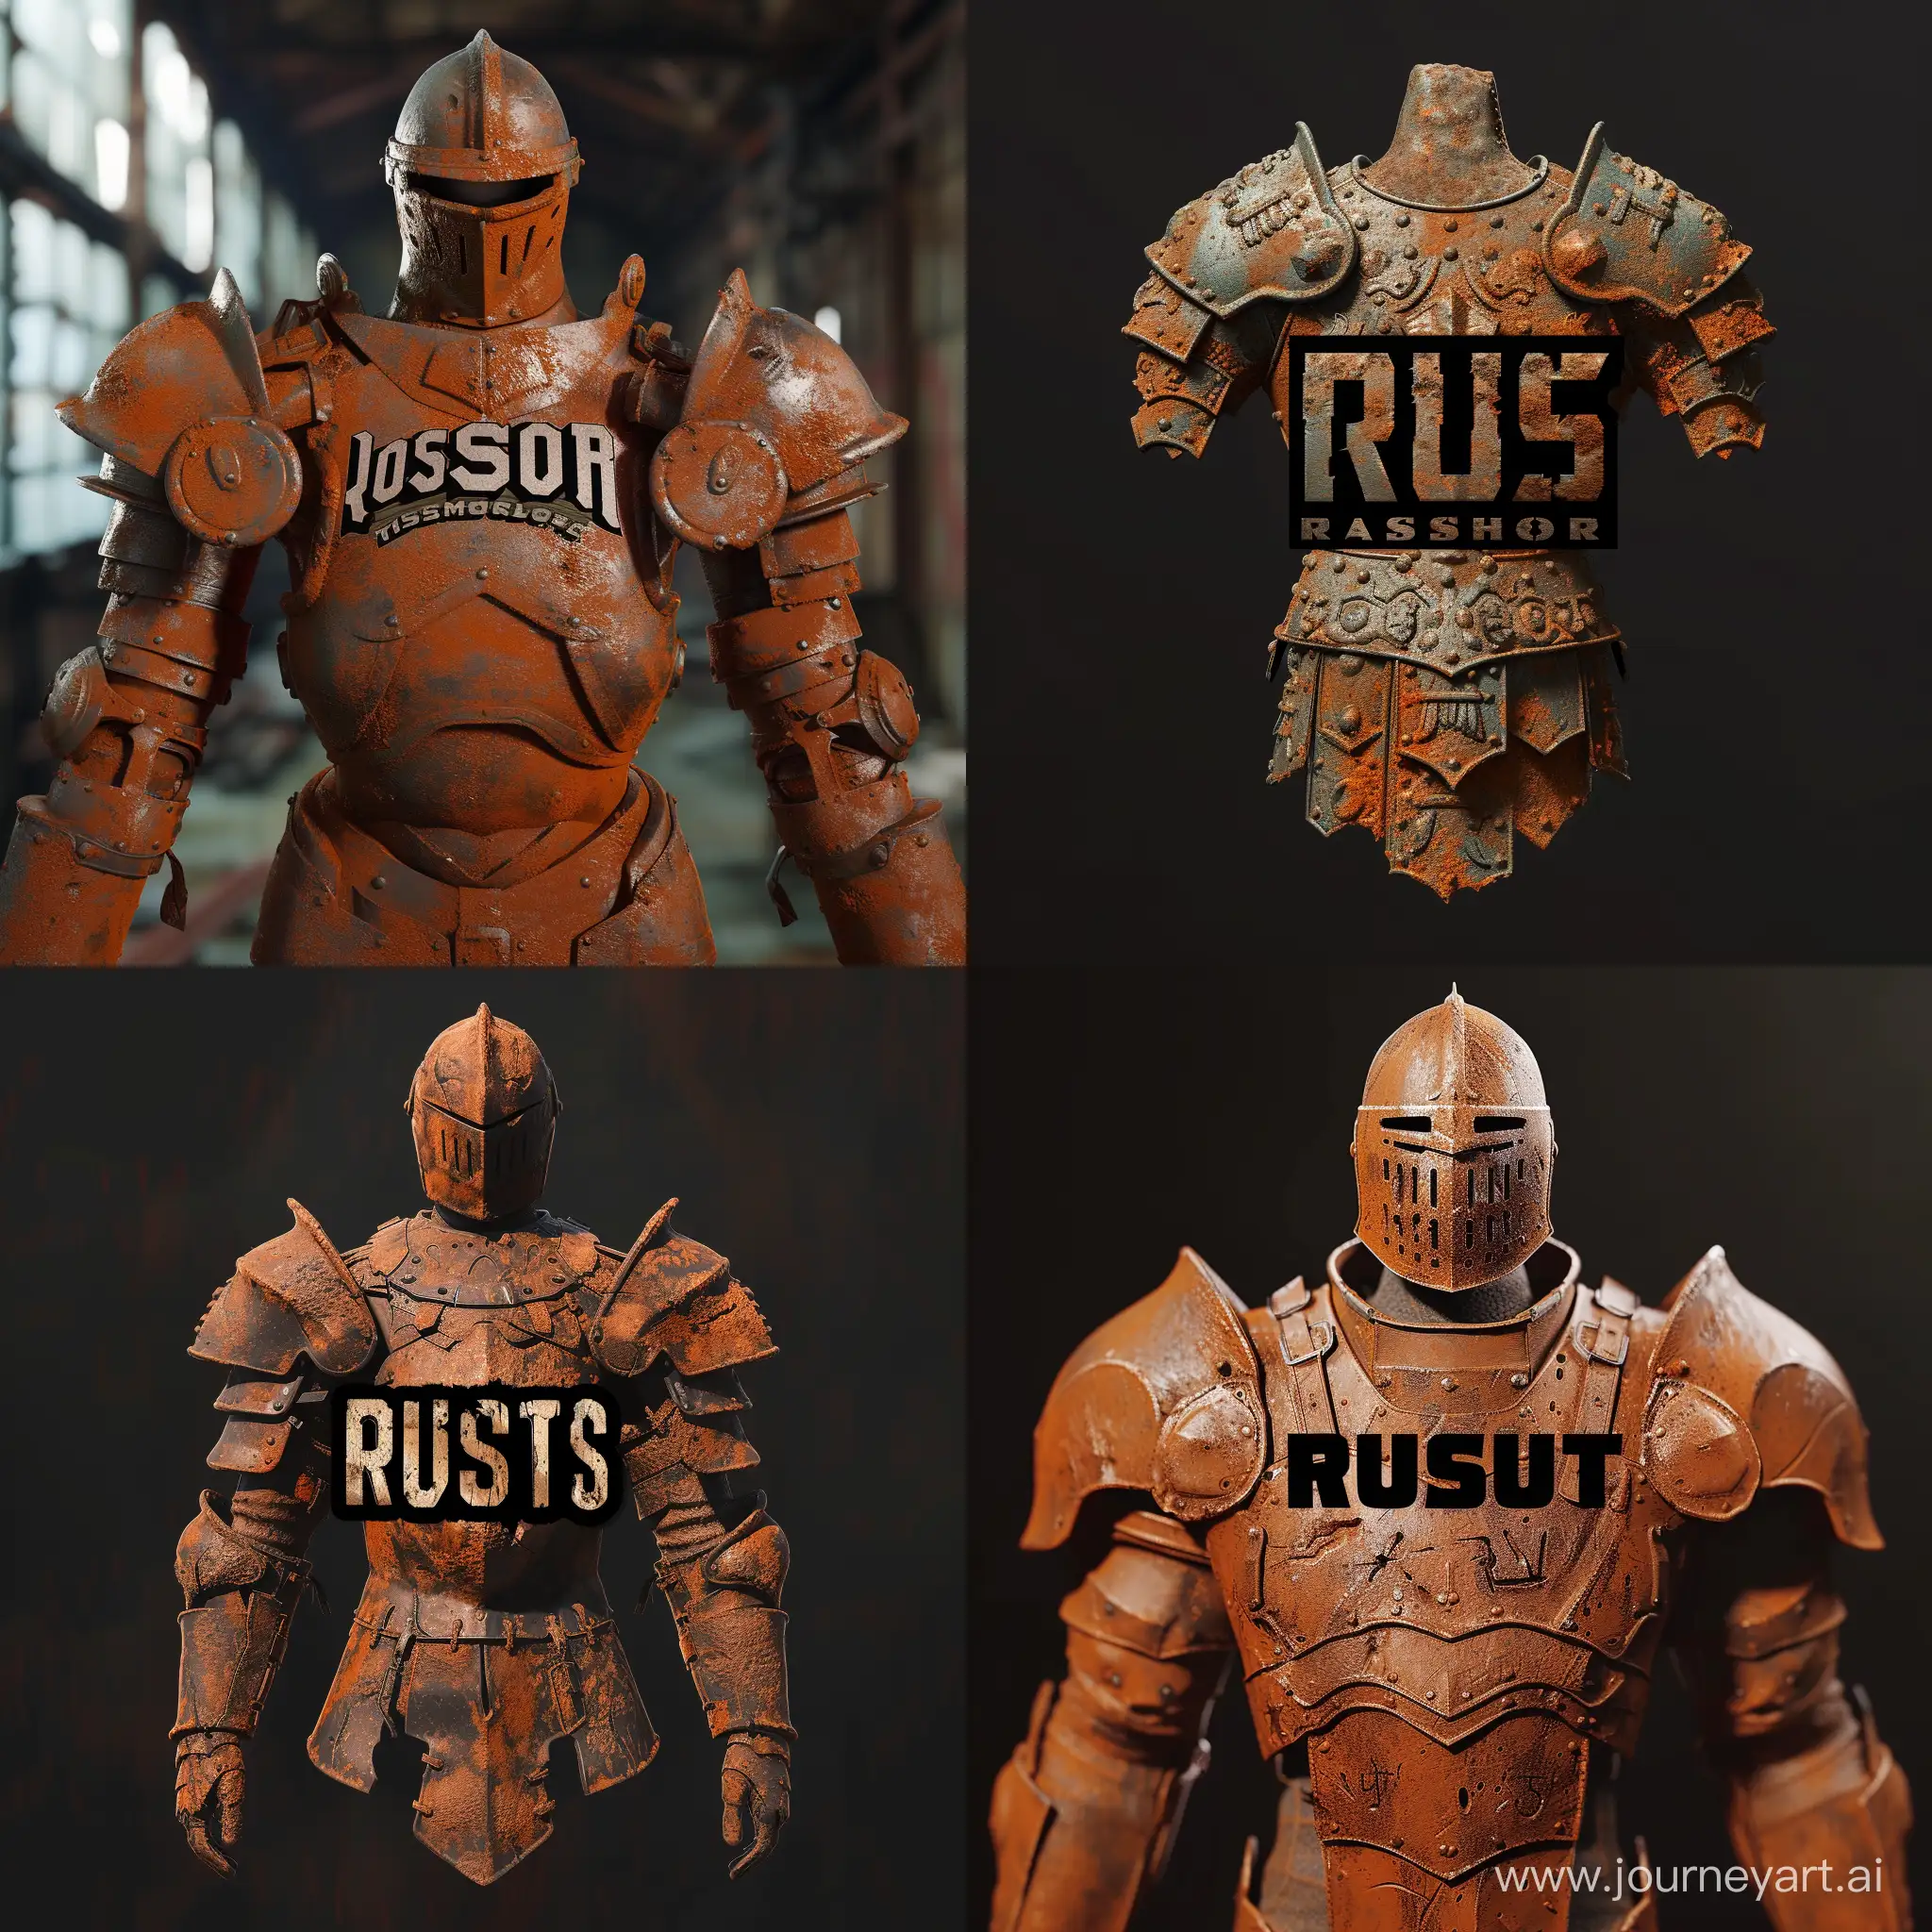 Create an image in the style of the game "RUST", with the title "Rust Armor" in the middle. --v 6 --ar 1:1 --no 18407